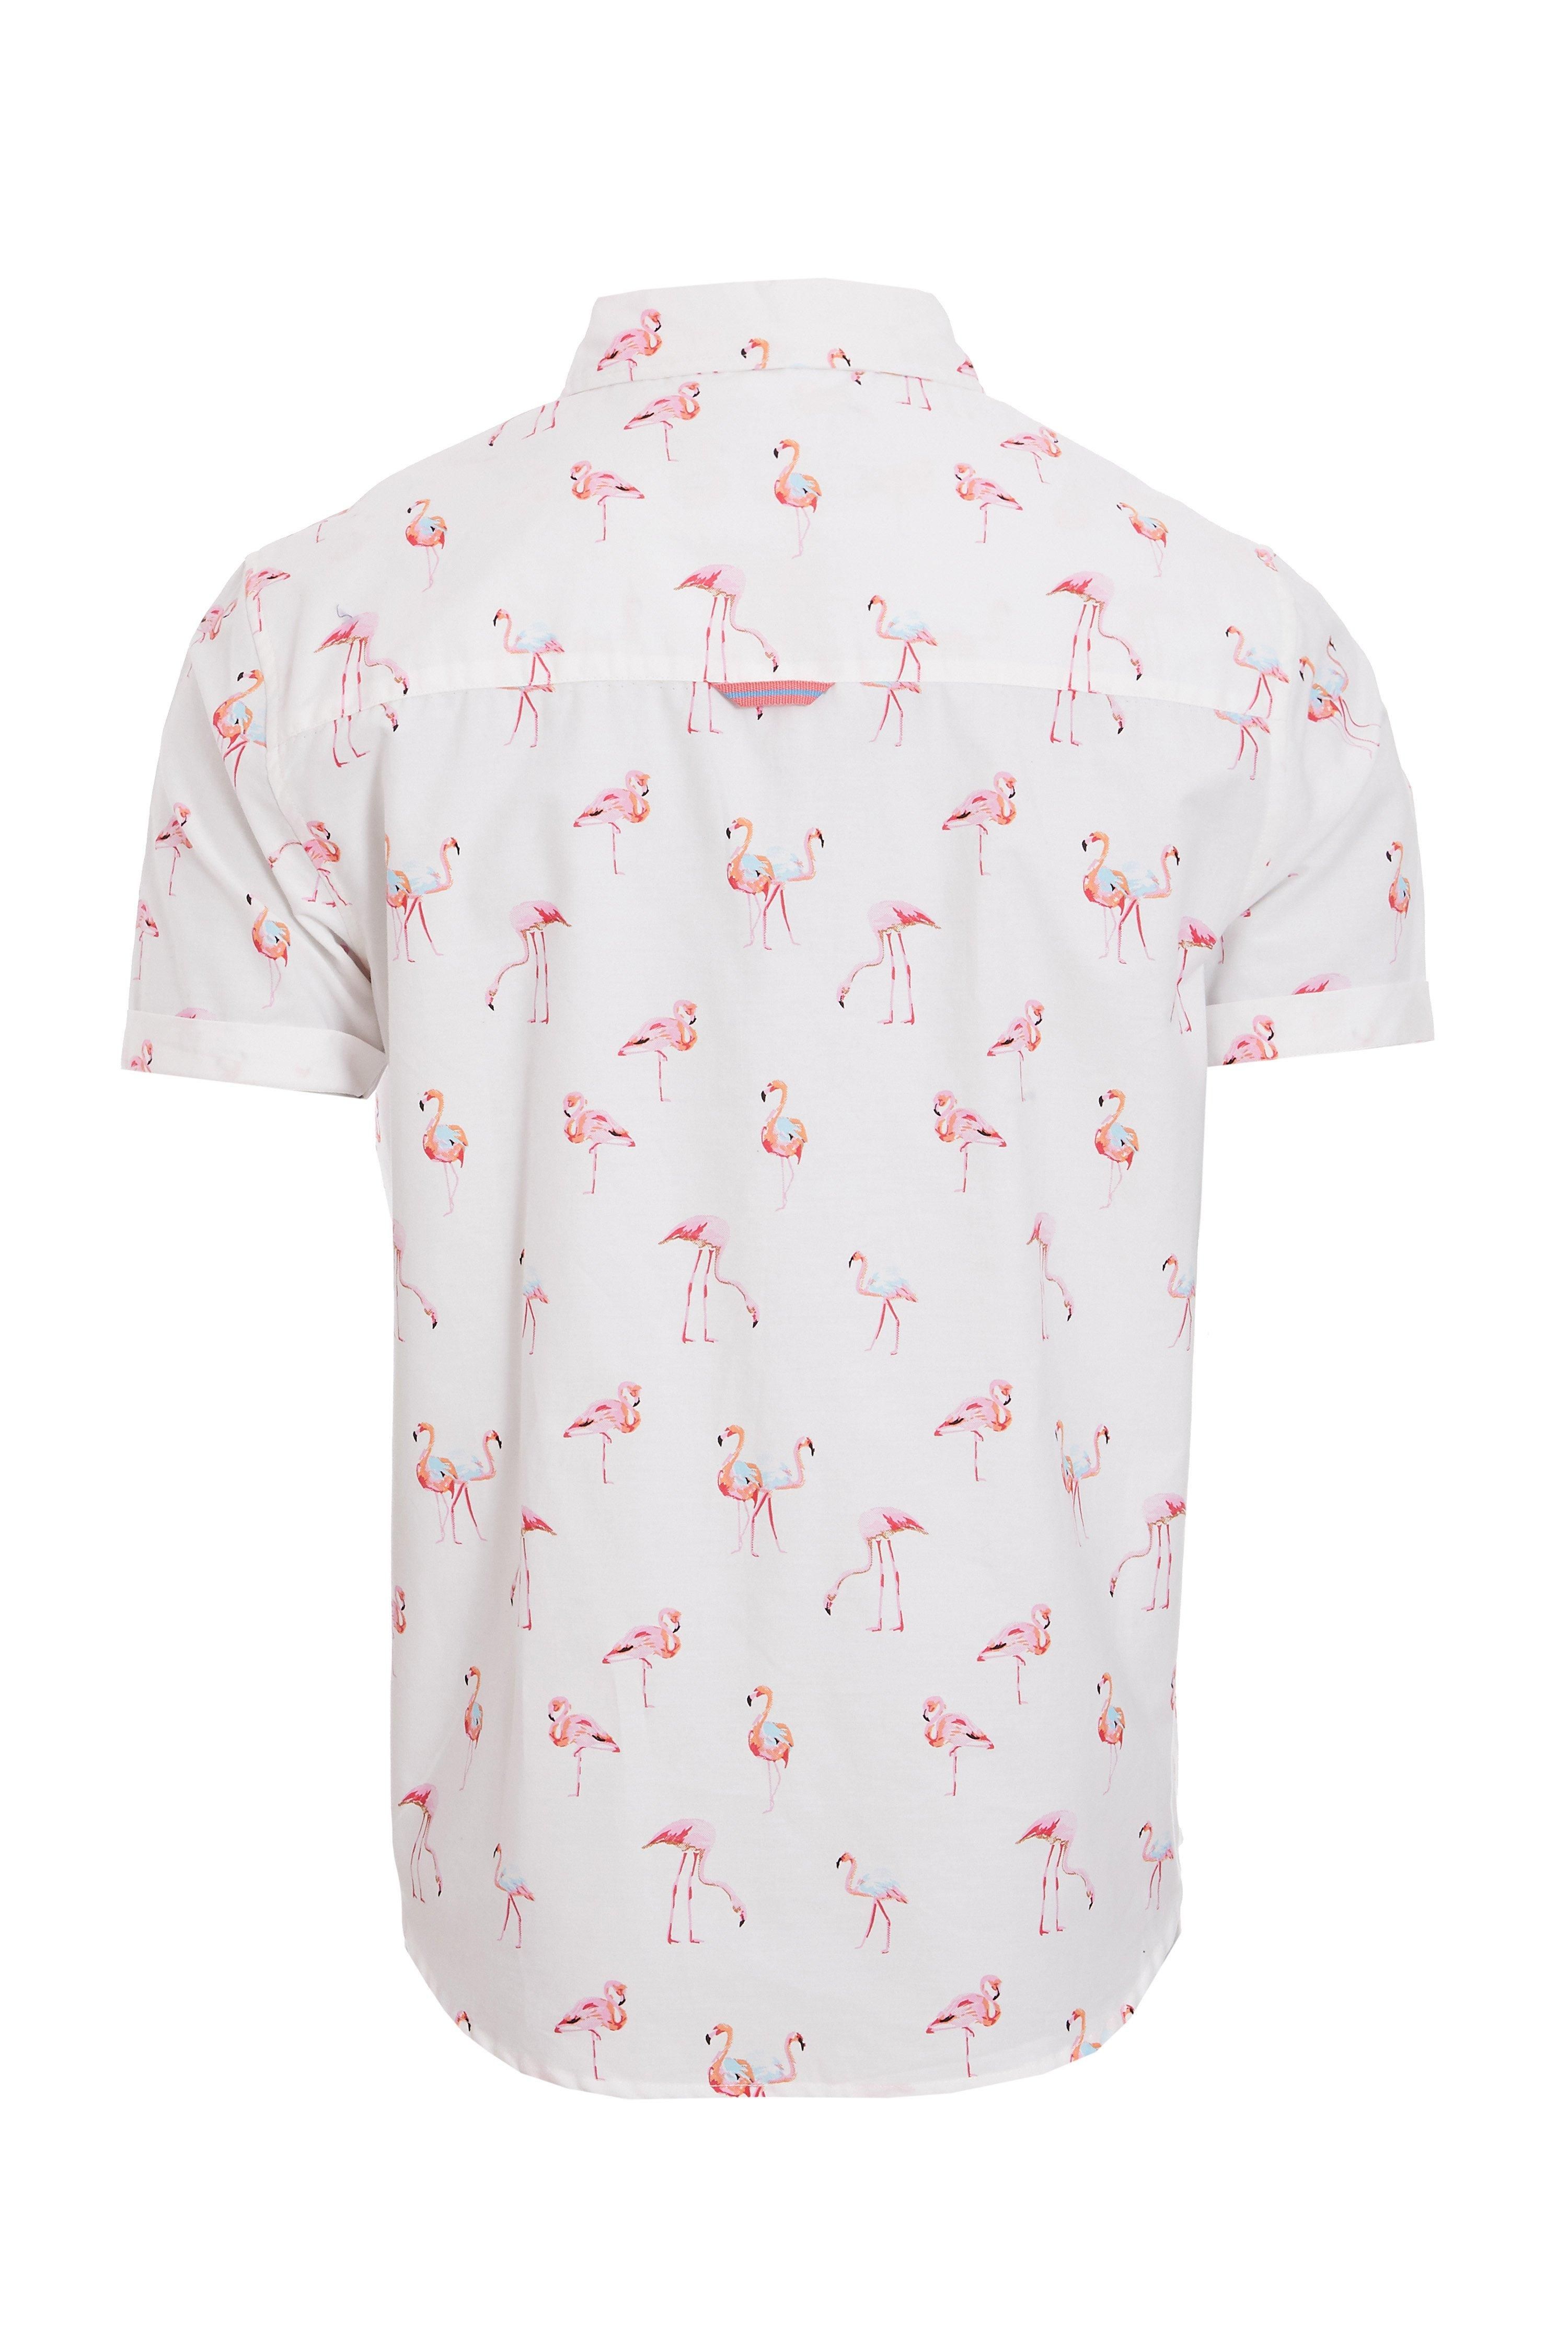 Slim Fit  	Classic Collar with Buttons  	Pink Flamingo Printed Design  	Short Sleeves  	White Buttob hrough Fastening  	Length 72cm